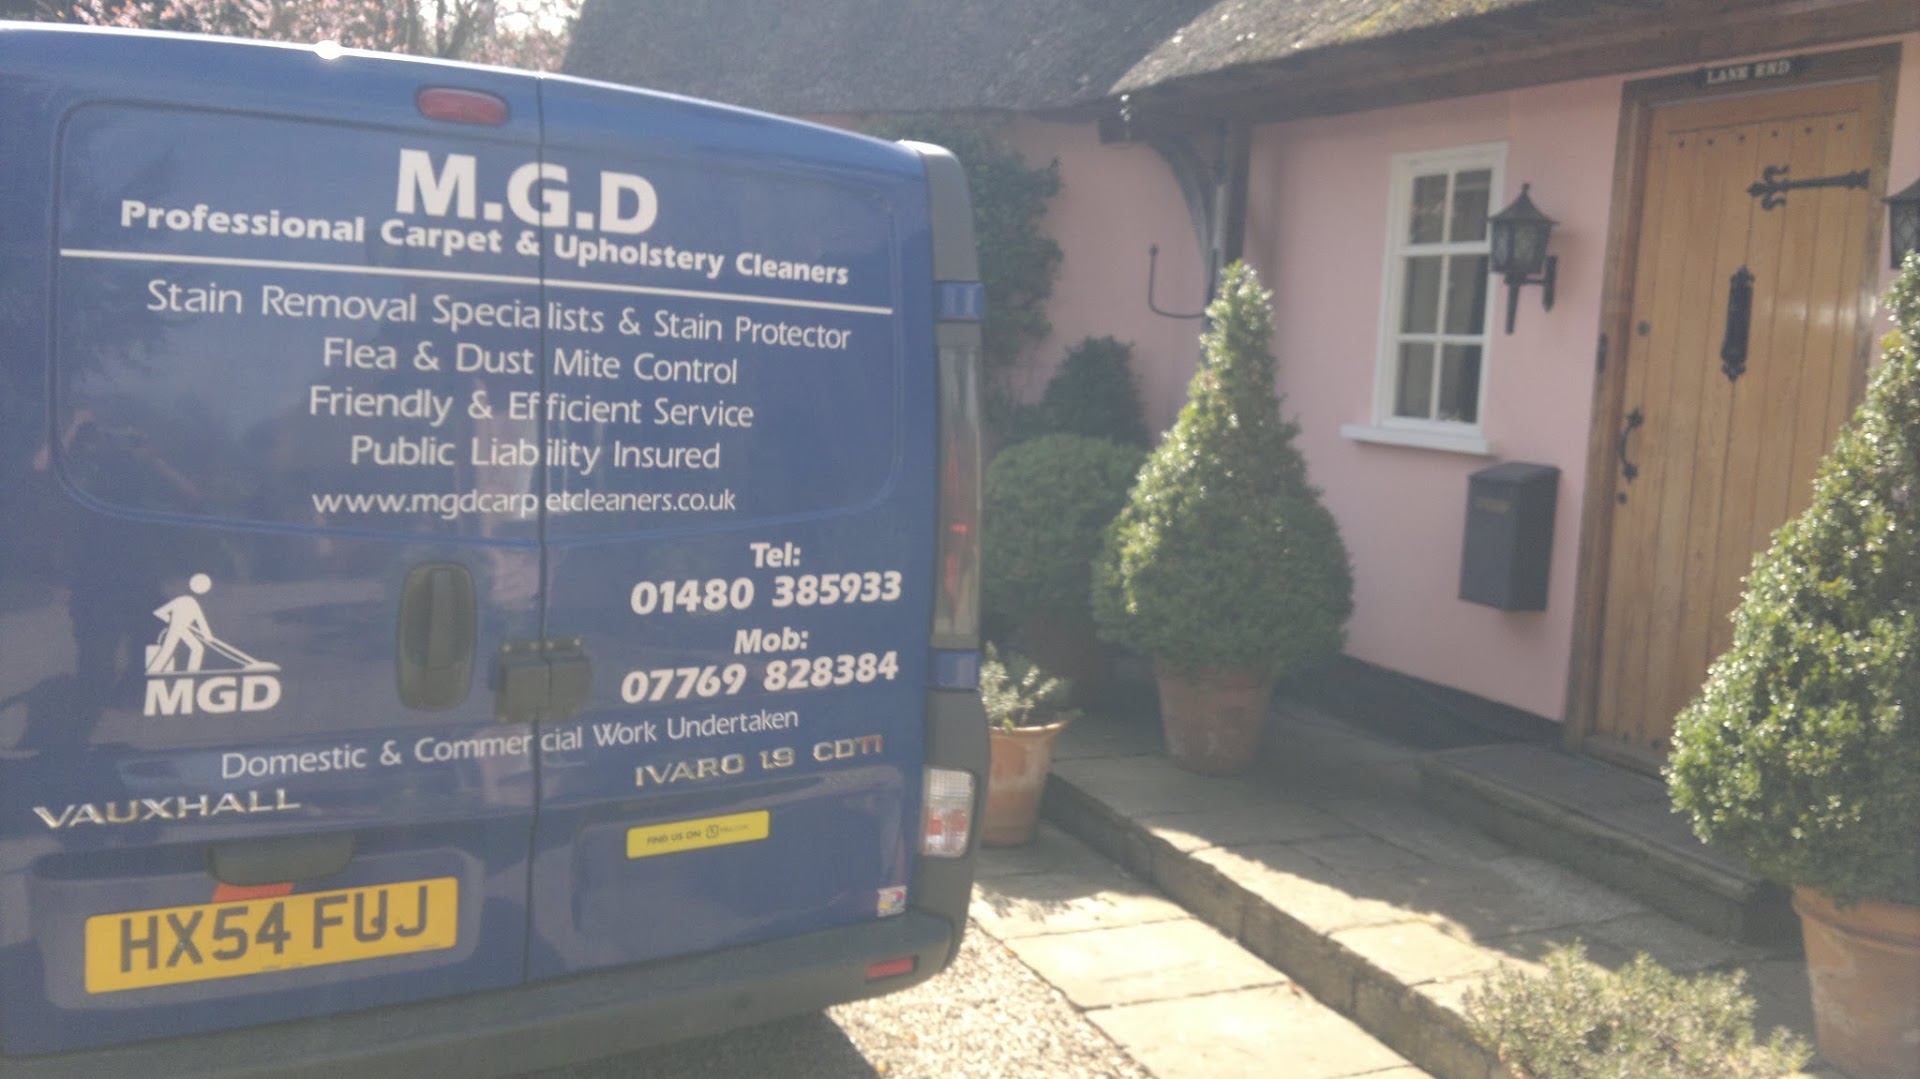 M.G.D Professional carpet & upholstery cleaners